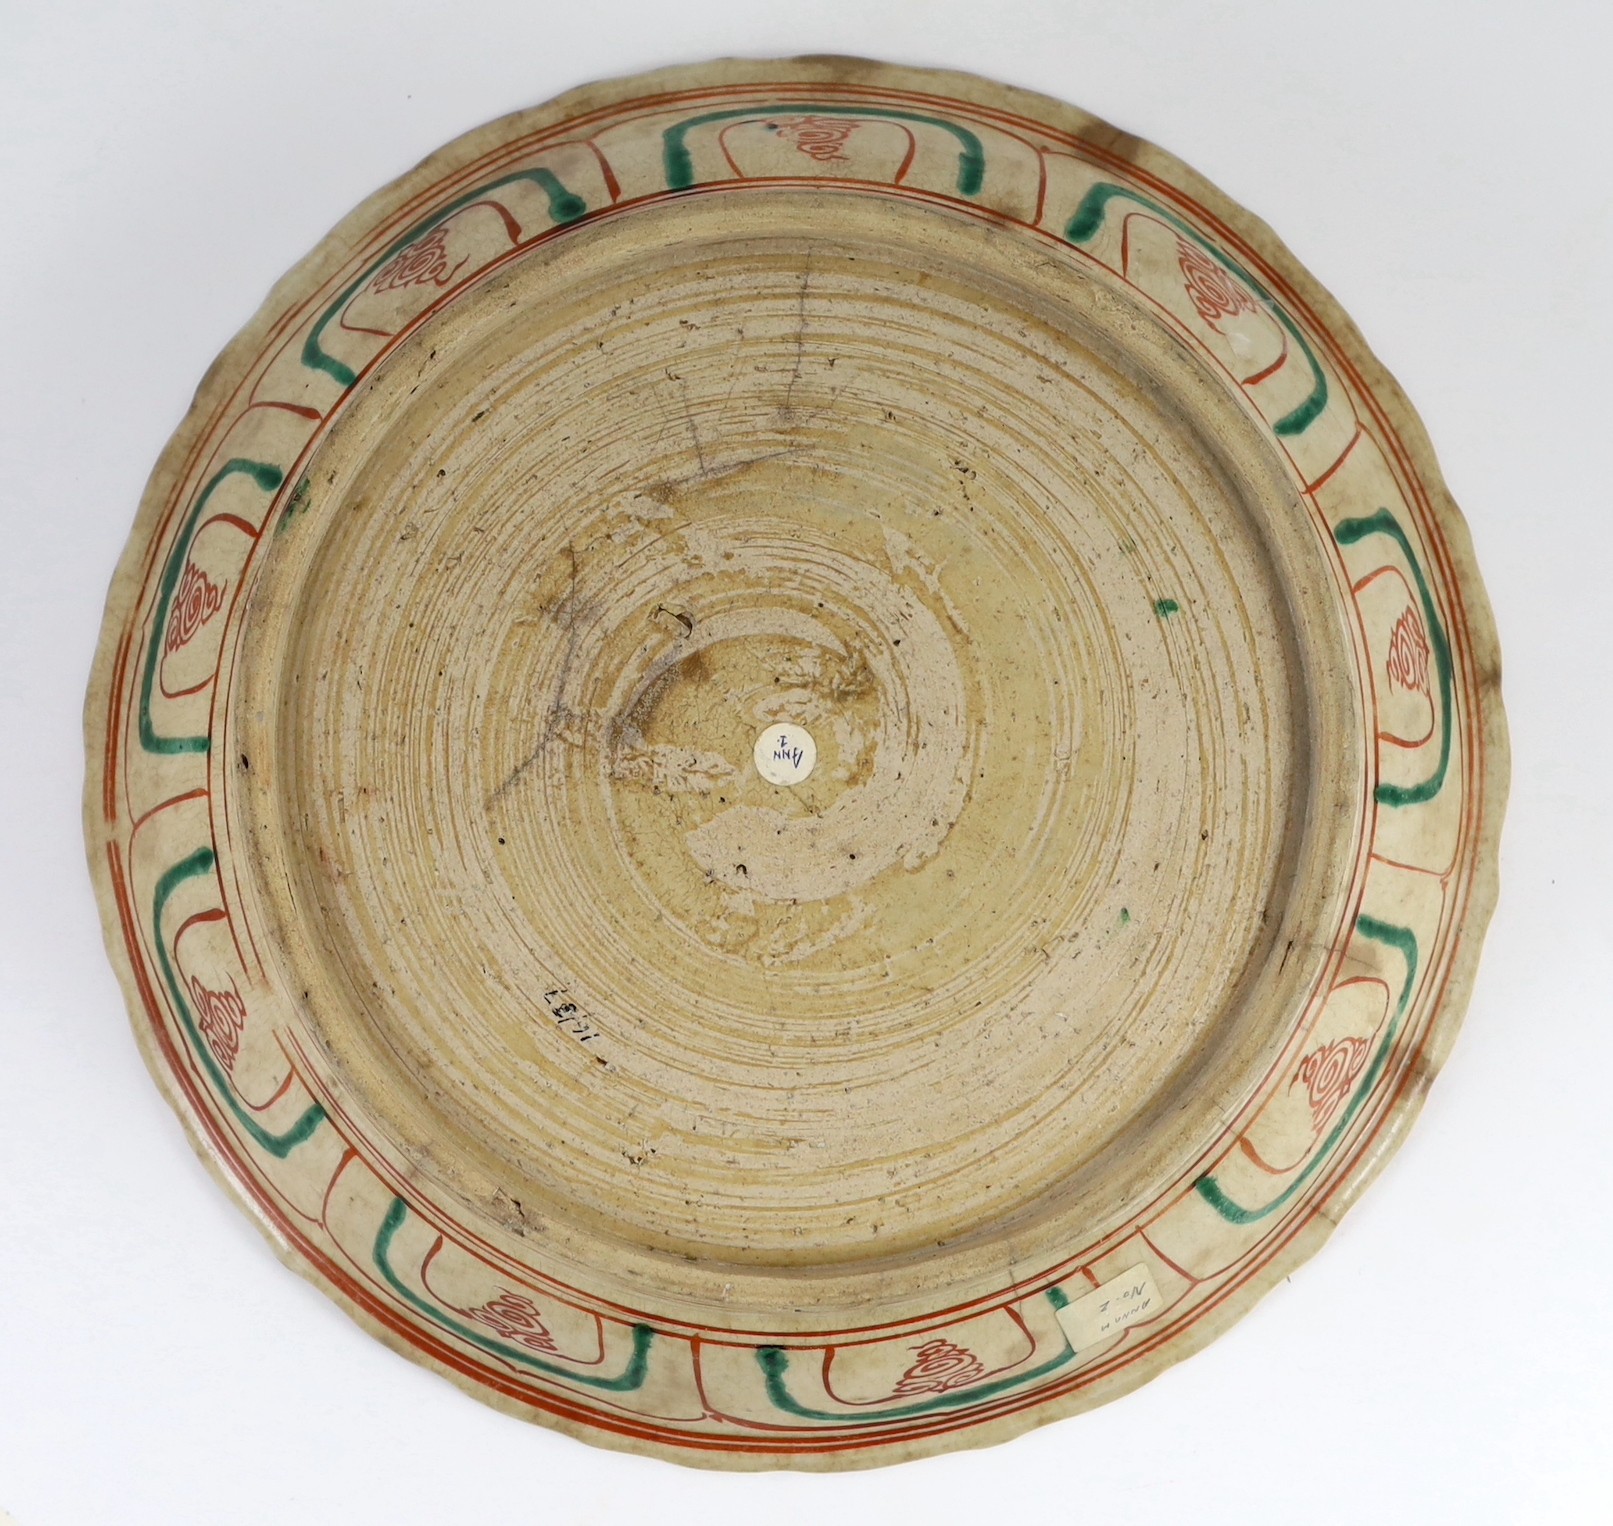 An Annamese polychrome ‘bird’ dish, 15th-16th century, 34.5cm diameter, stained and with cracks